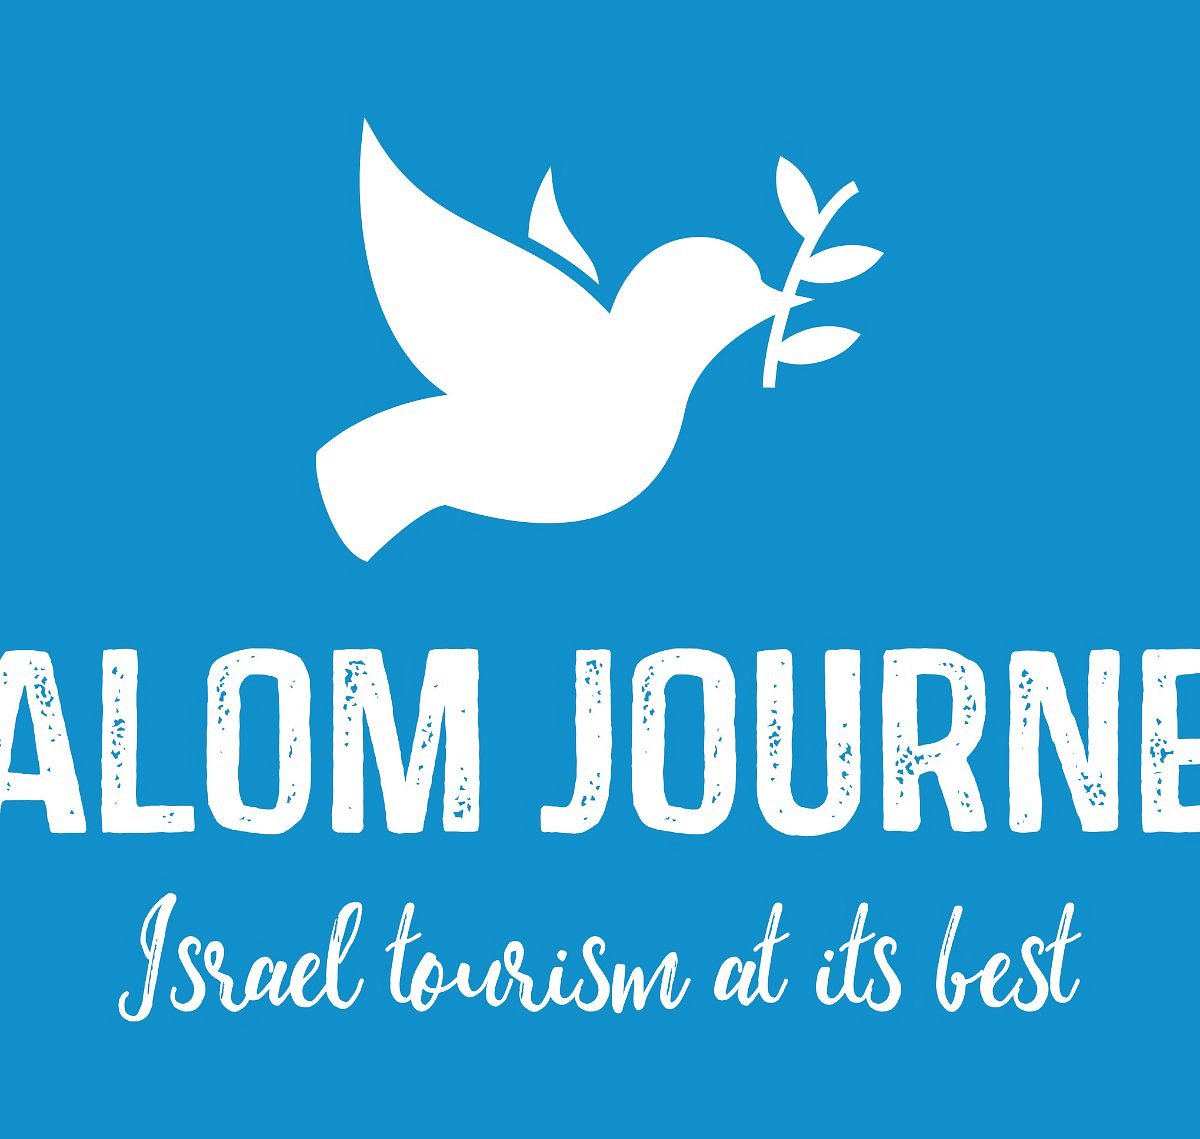 Shalom Israel Tours - All You Need to Know BEFORE You Go (with Photos)